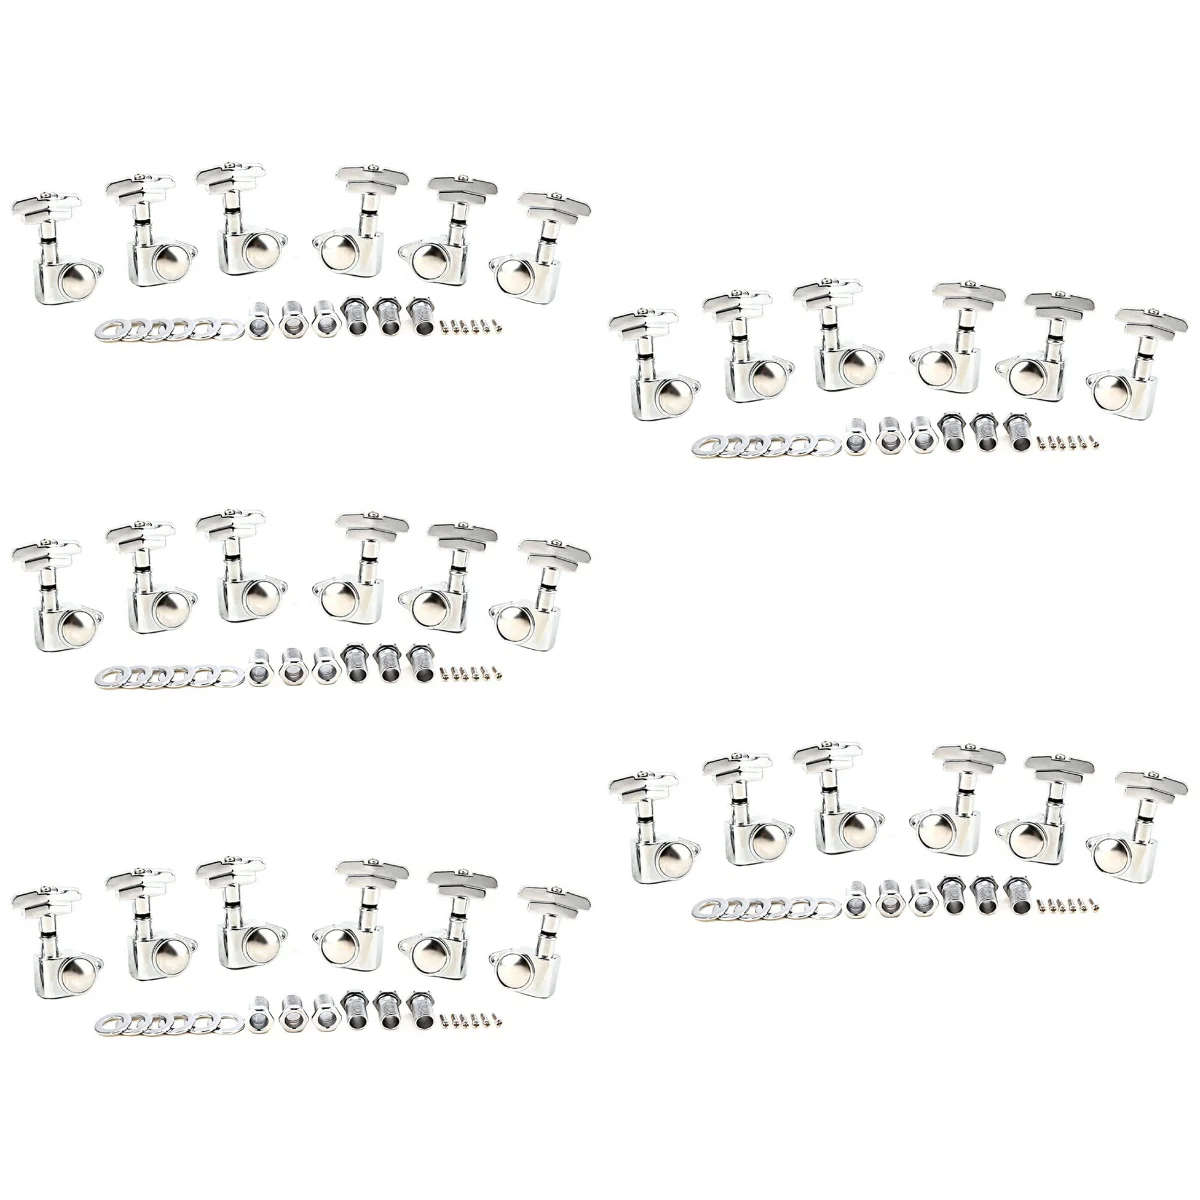 5 Sets  of Guitar Tuning Key Peg Guitar Part Tuners Instrument Supply enlarge